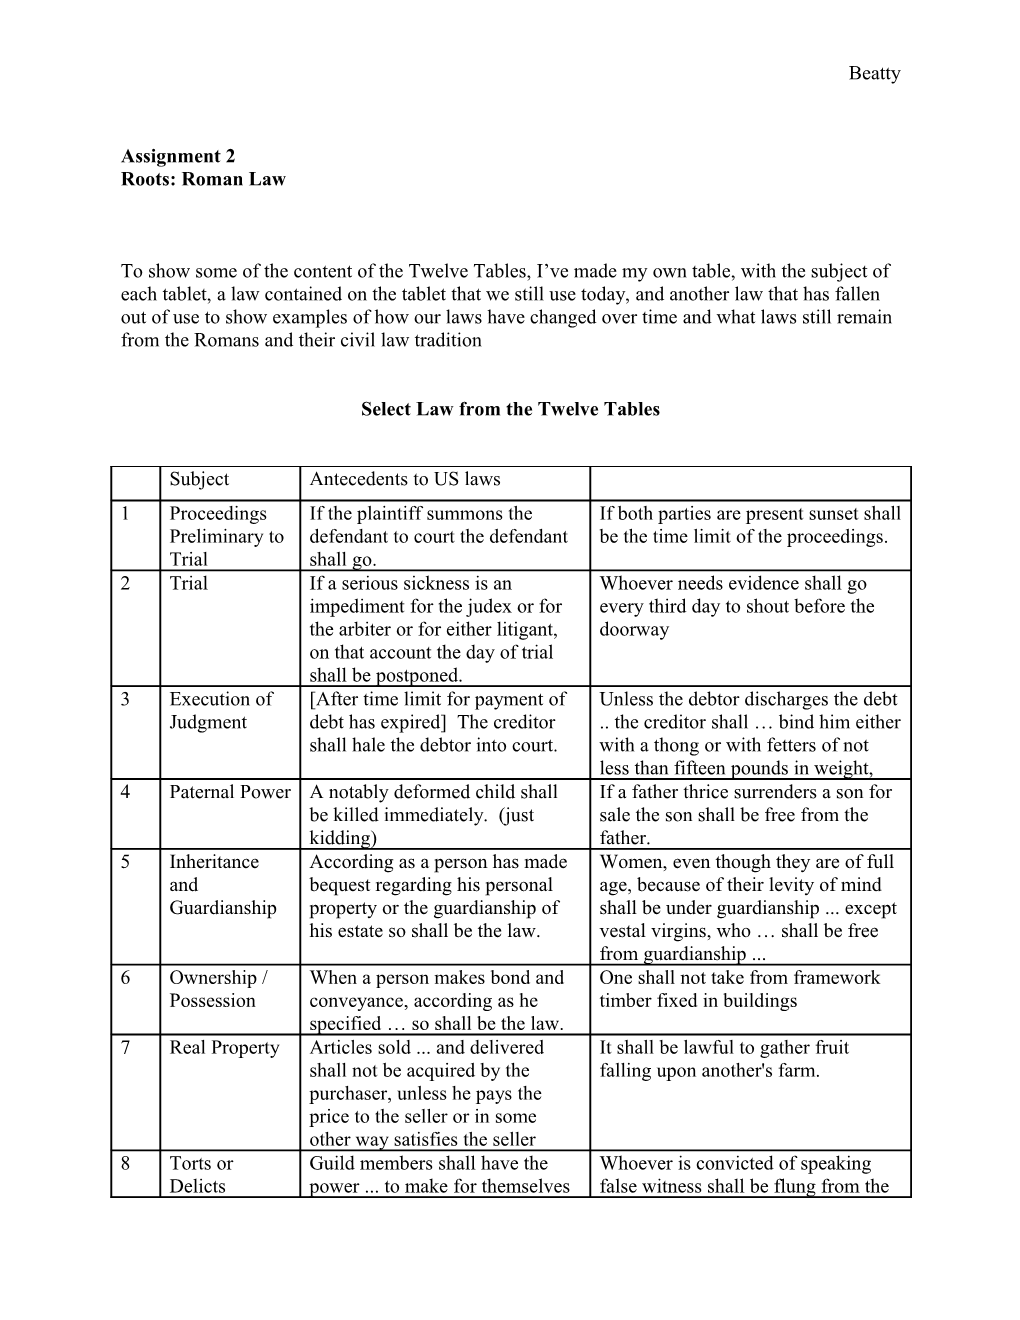 Select Law from the Twelve Tables